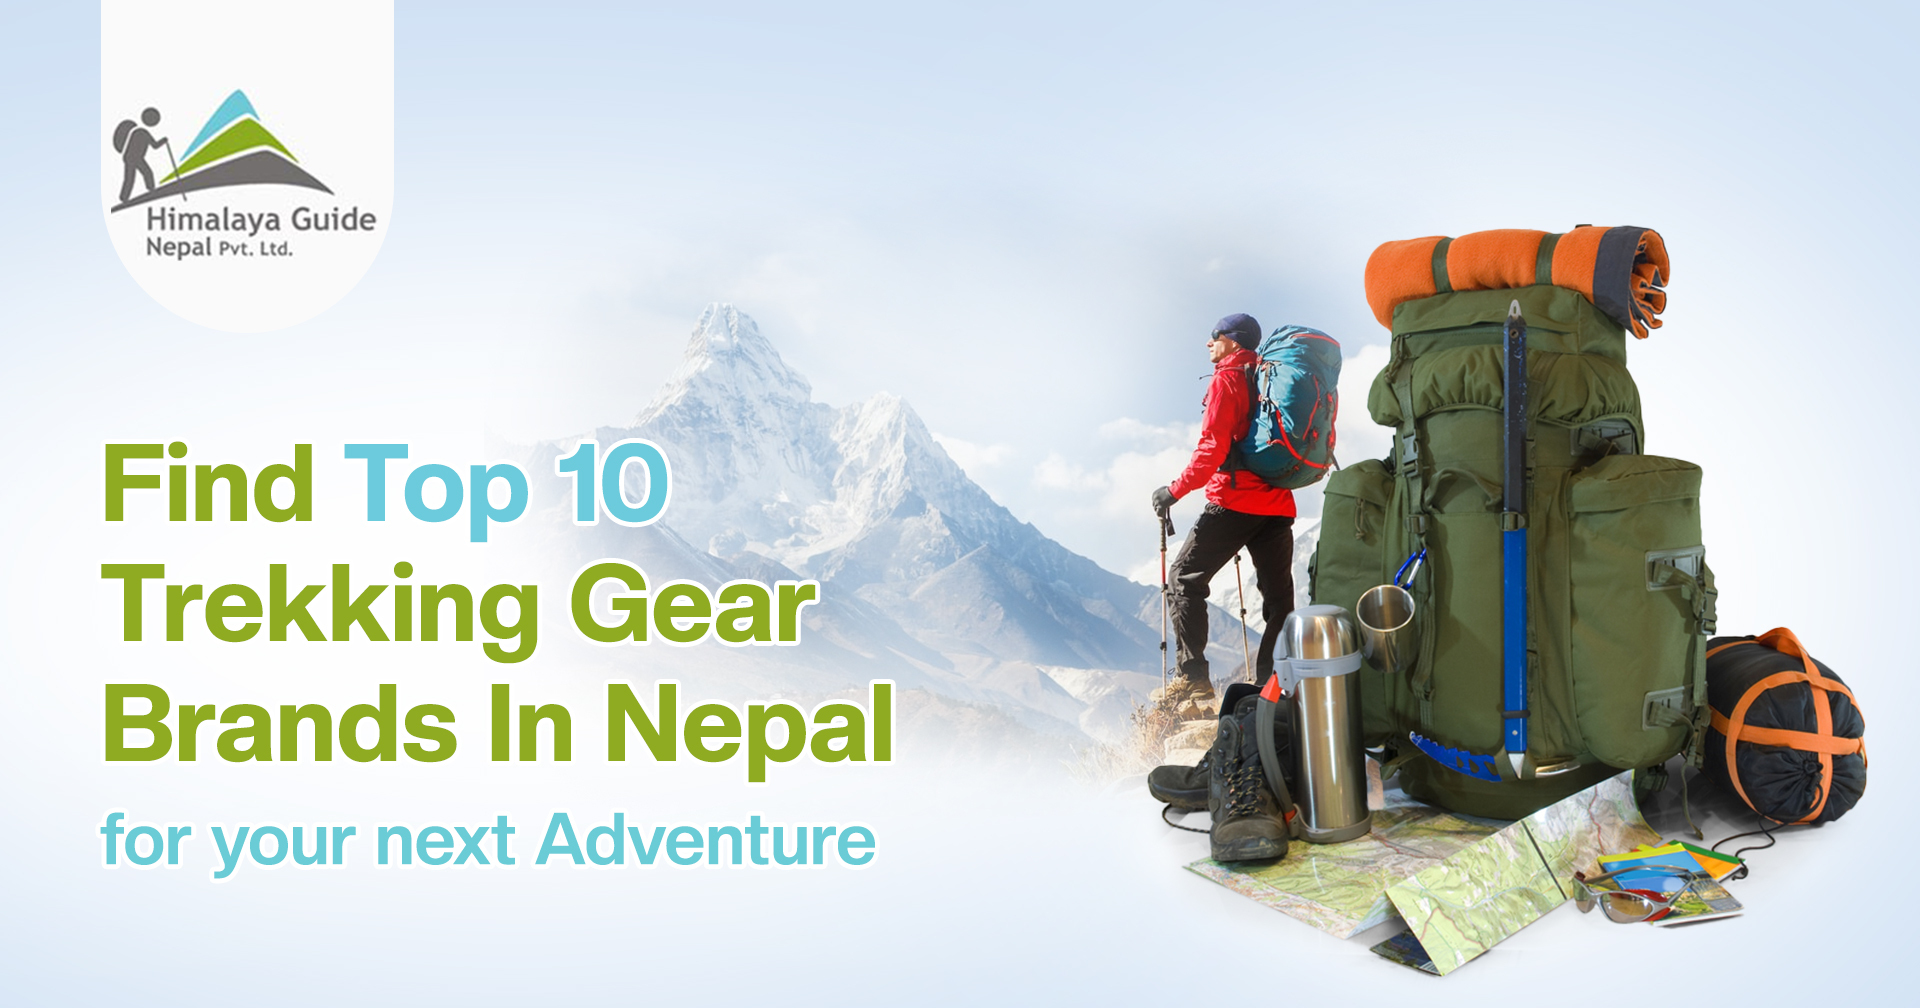 Find the 10 Trekking Gear Brands in Nepal for your Next Adventure 